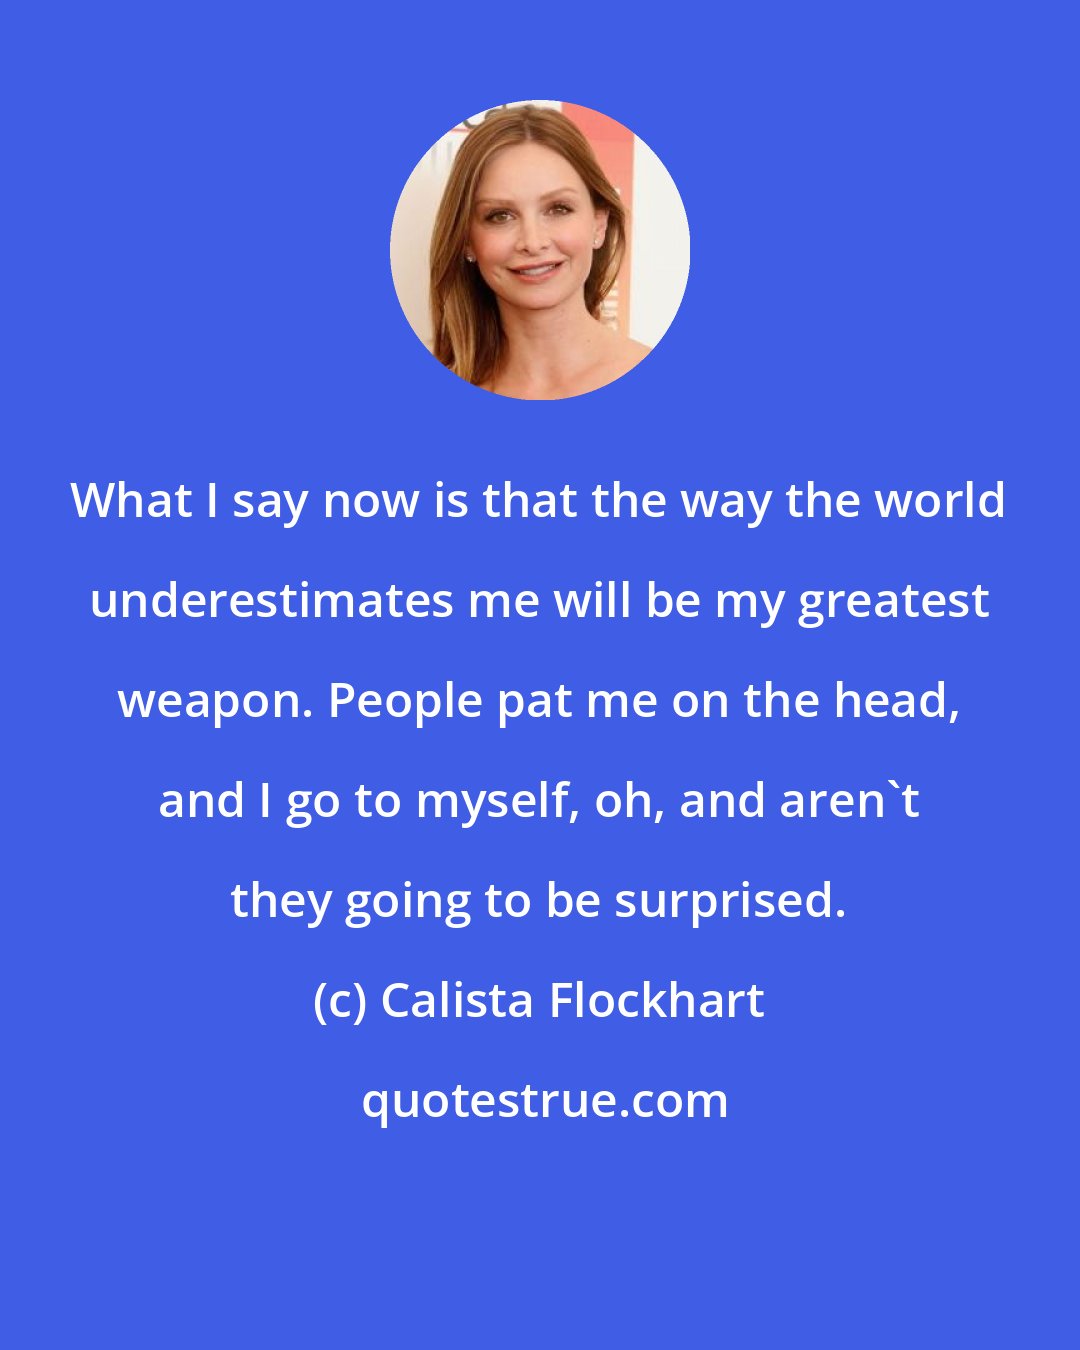 Calista Flockhart: What I say now is that the way the world underestimates me will be my greatest weapon. People pat me on the head, and I go to myself, oh, and aren't they going to be surprised.